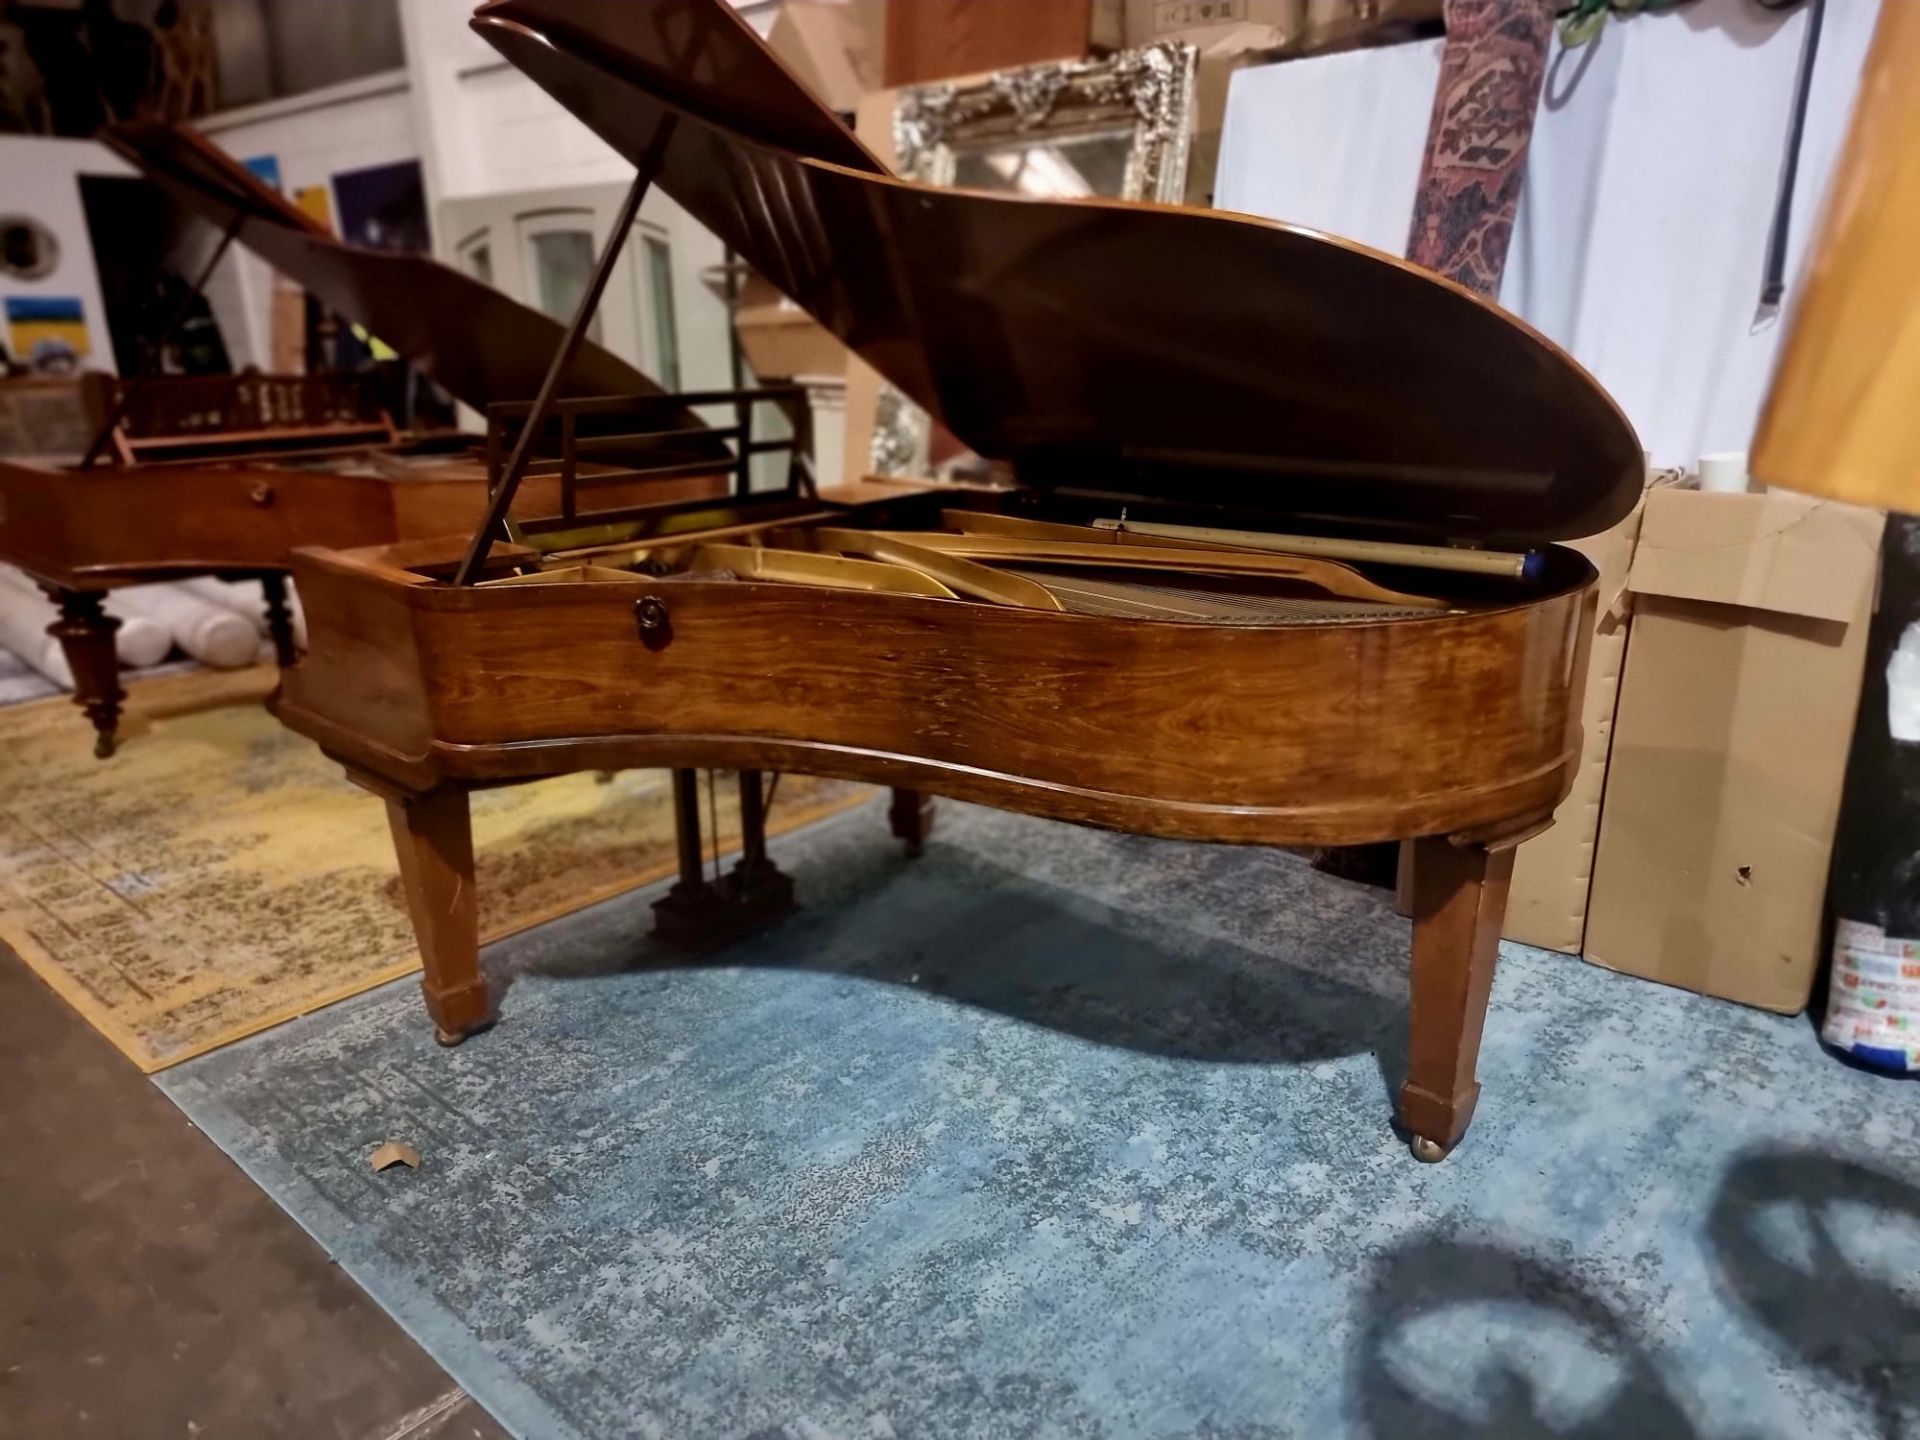 Blunther IX Classic Grand Piano In Rosewood With Blunther Patent Aliquot Stringing System Blunther - Image 4 of 11